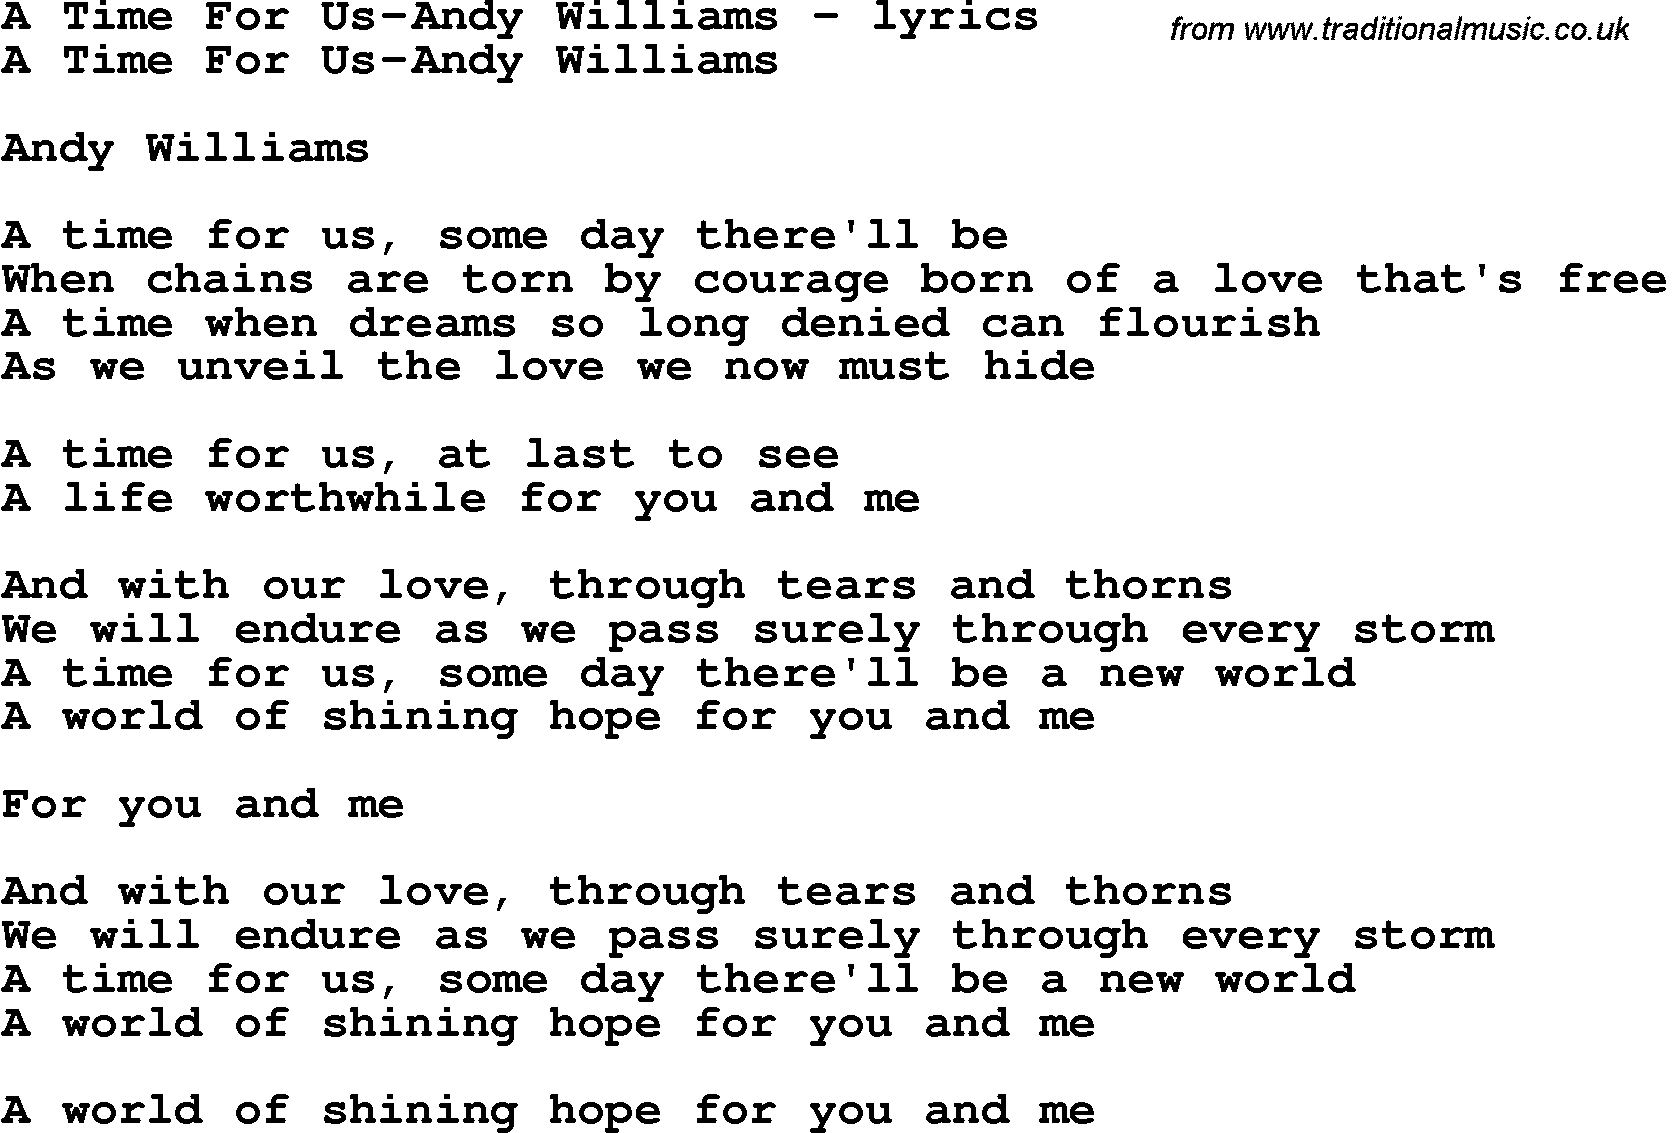 Love Song Lyrics for: A Time For Us-Andy Williams